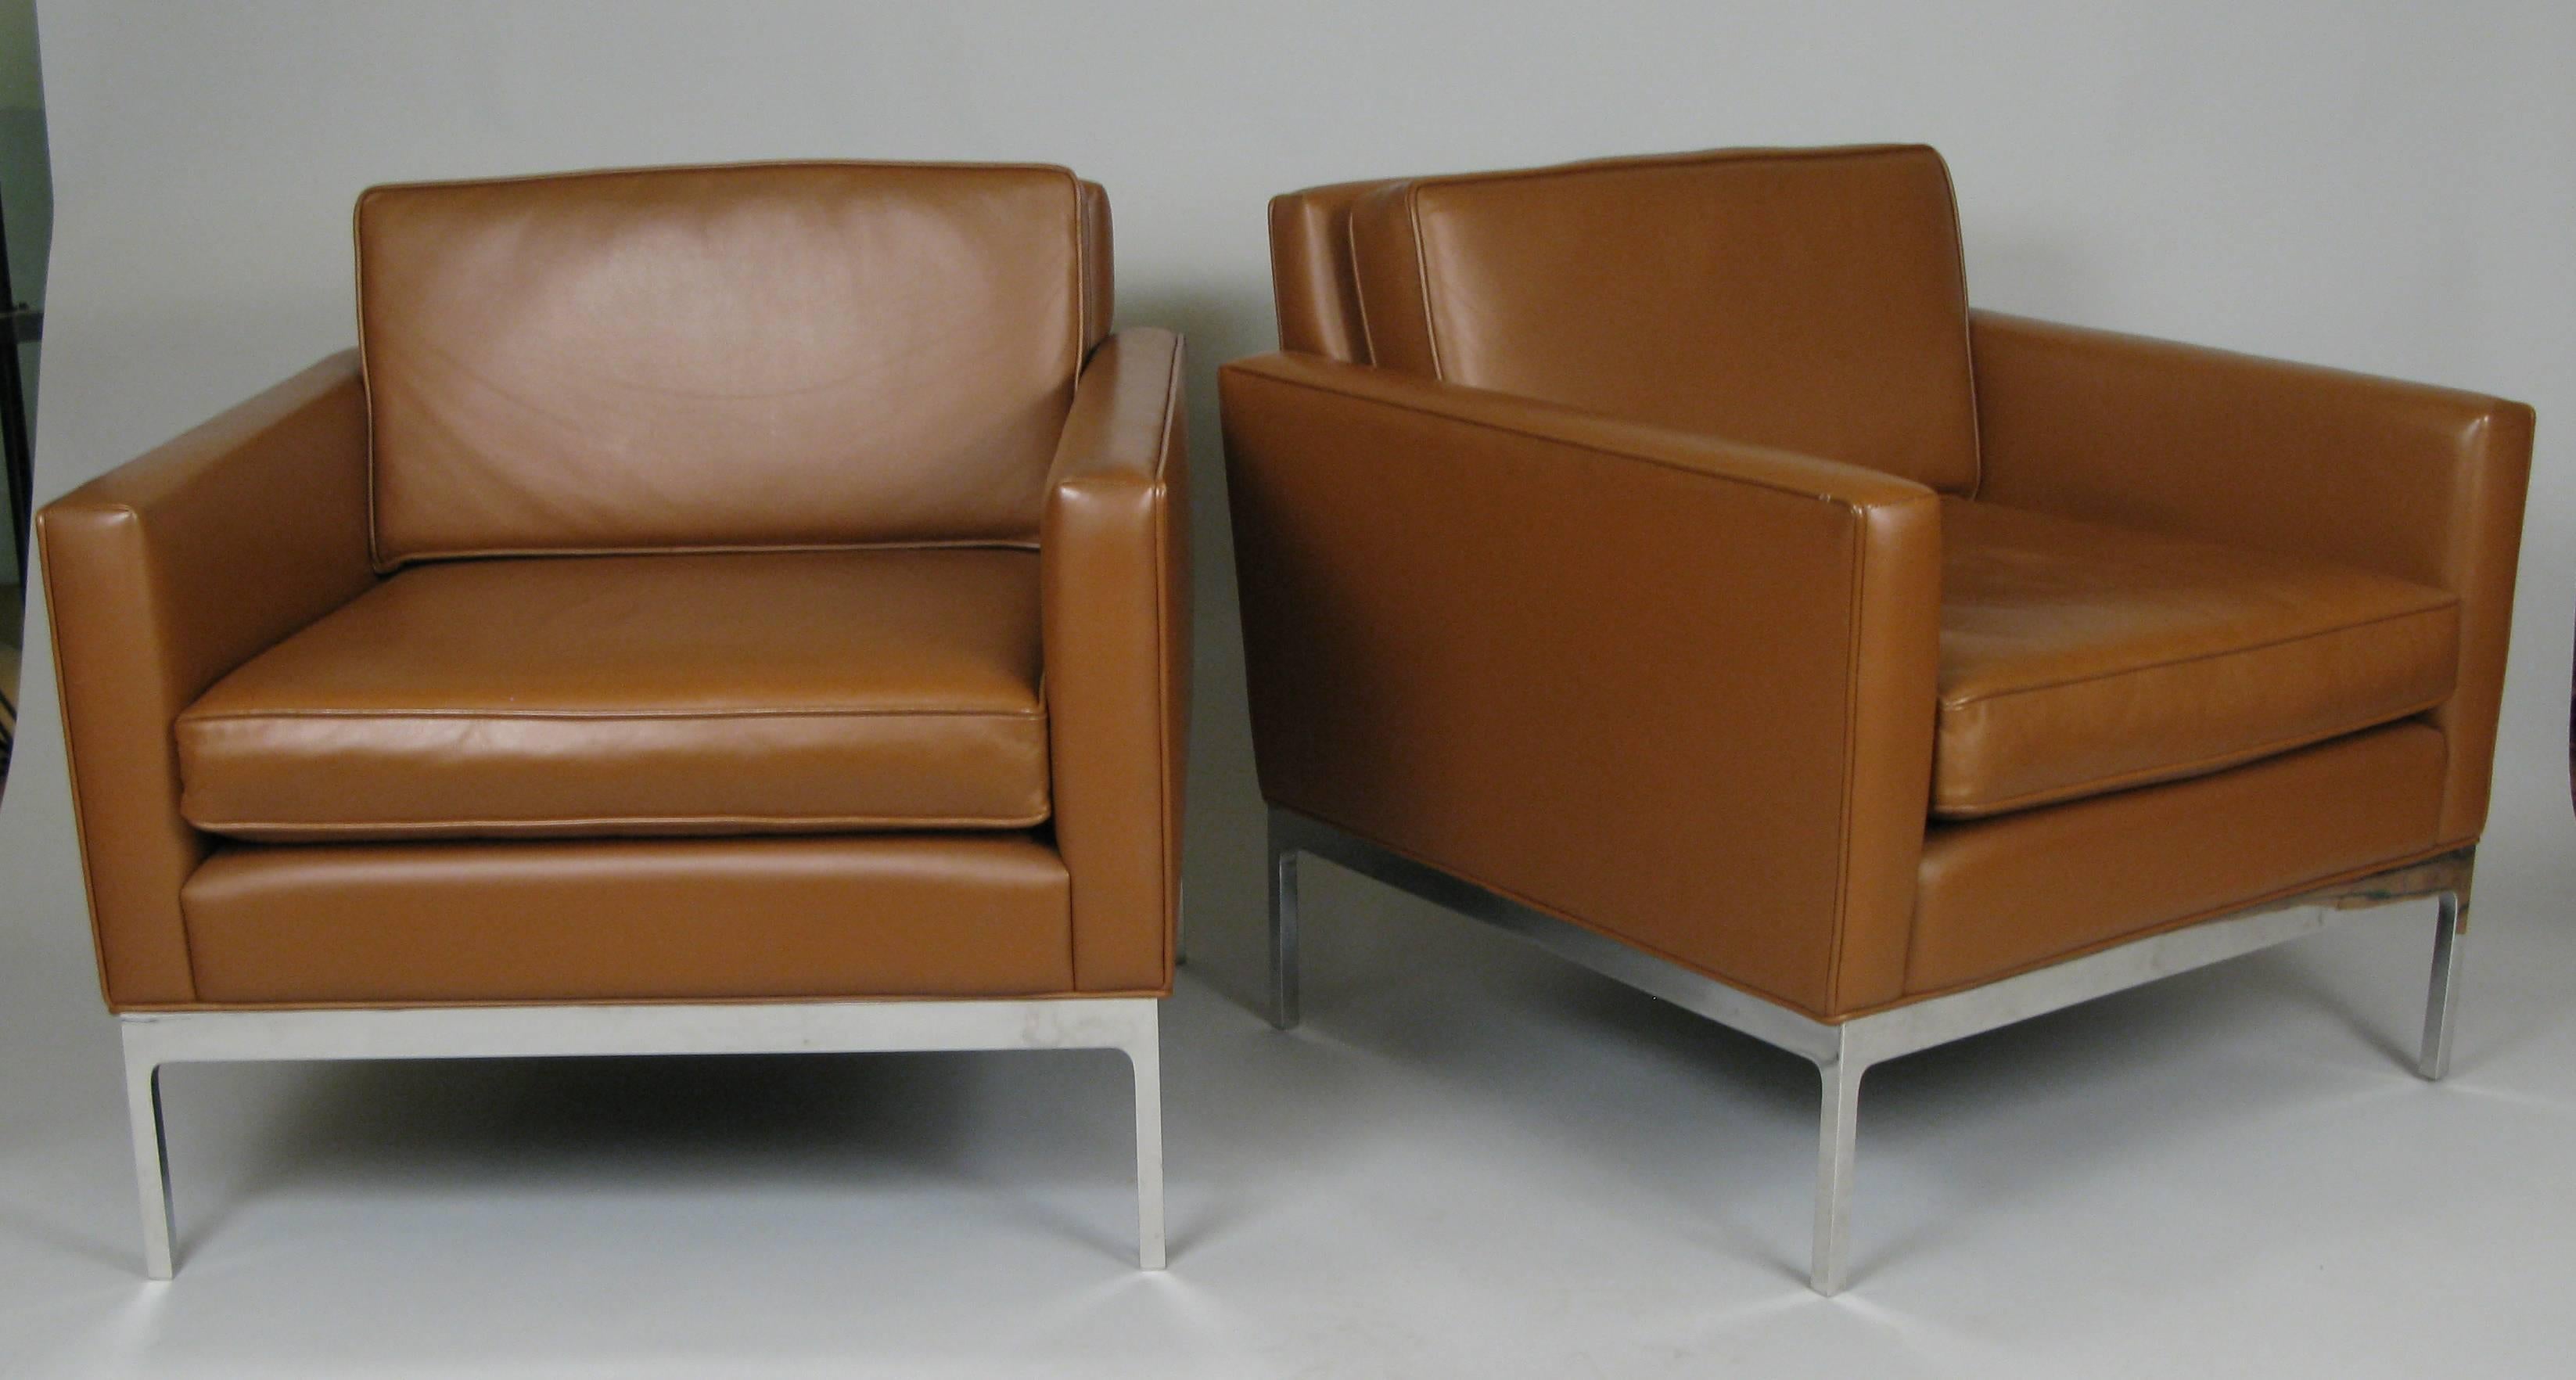 American Pair of Leather and Polished Steel Lounge Chairs by Nicos Zographos